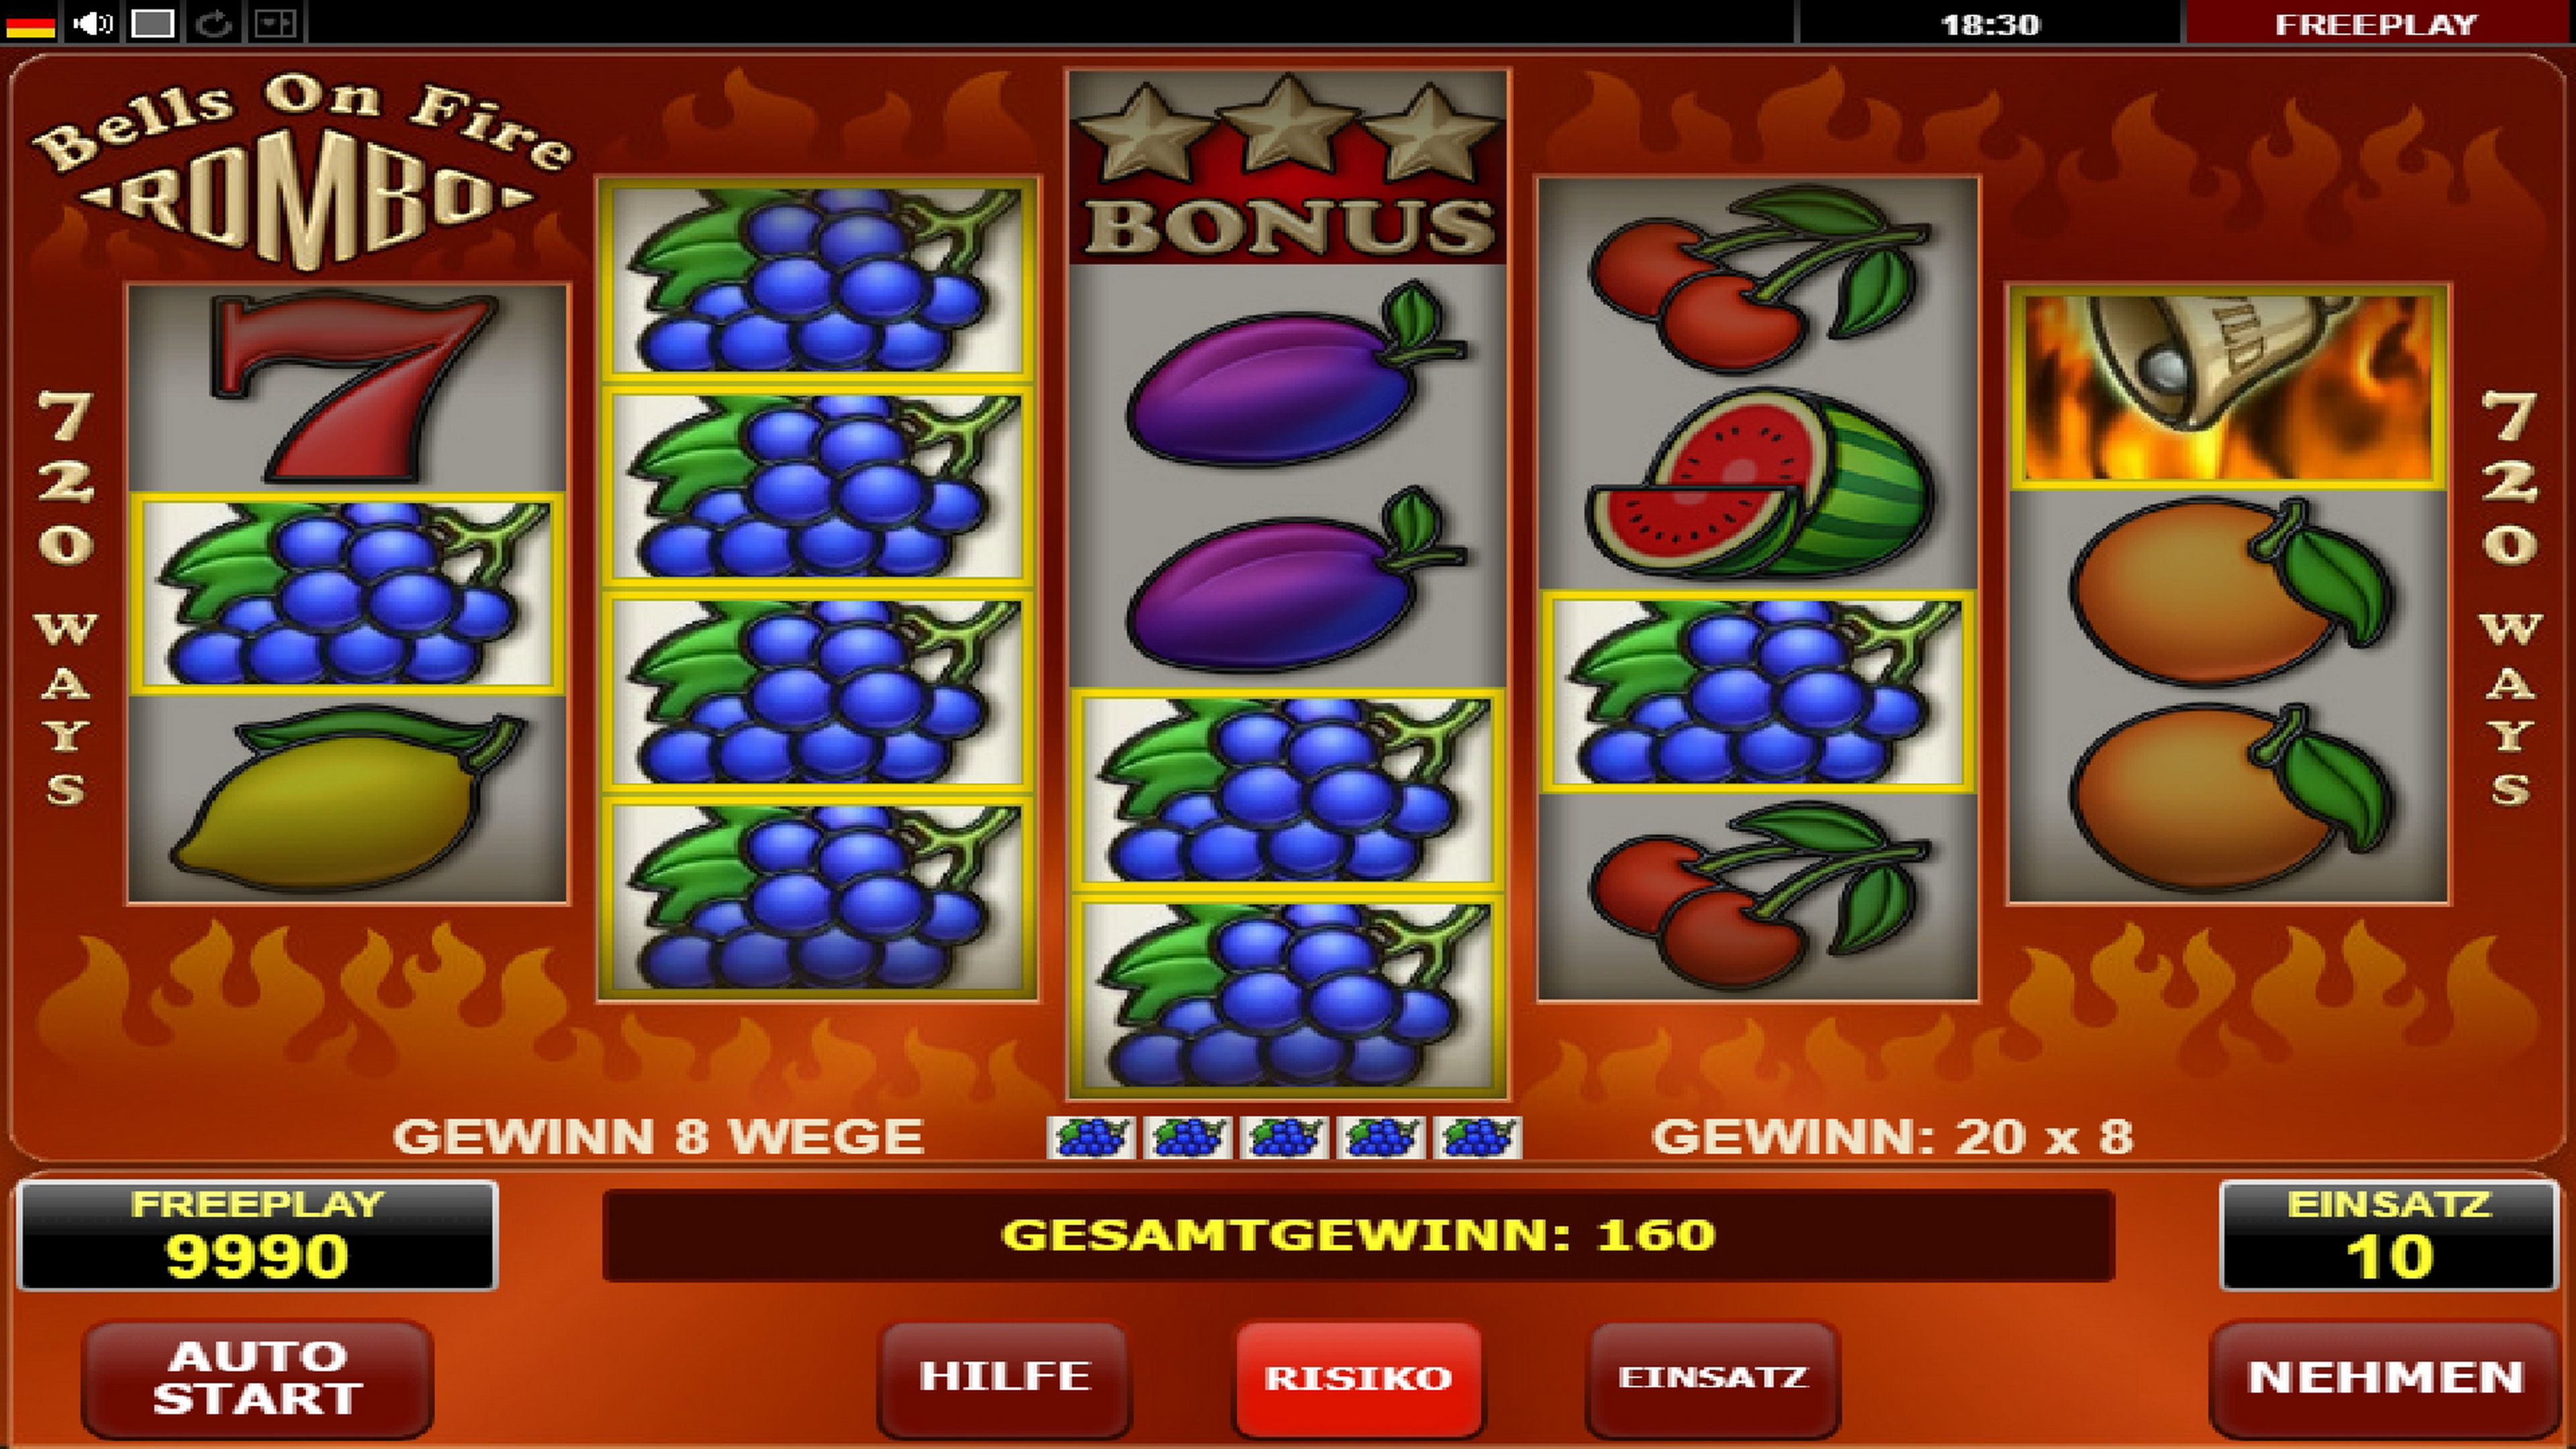 Win Money in Bells On Fire Rombo Free Slot Game by Amatic Industries